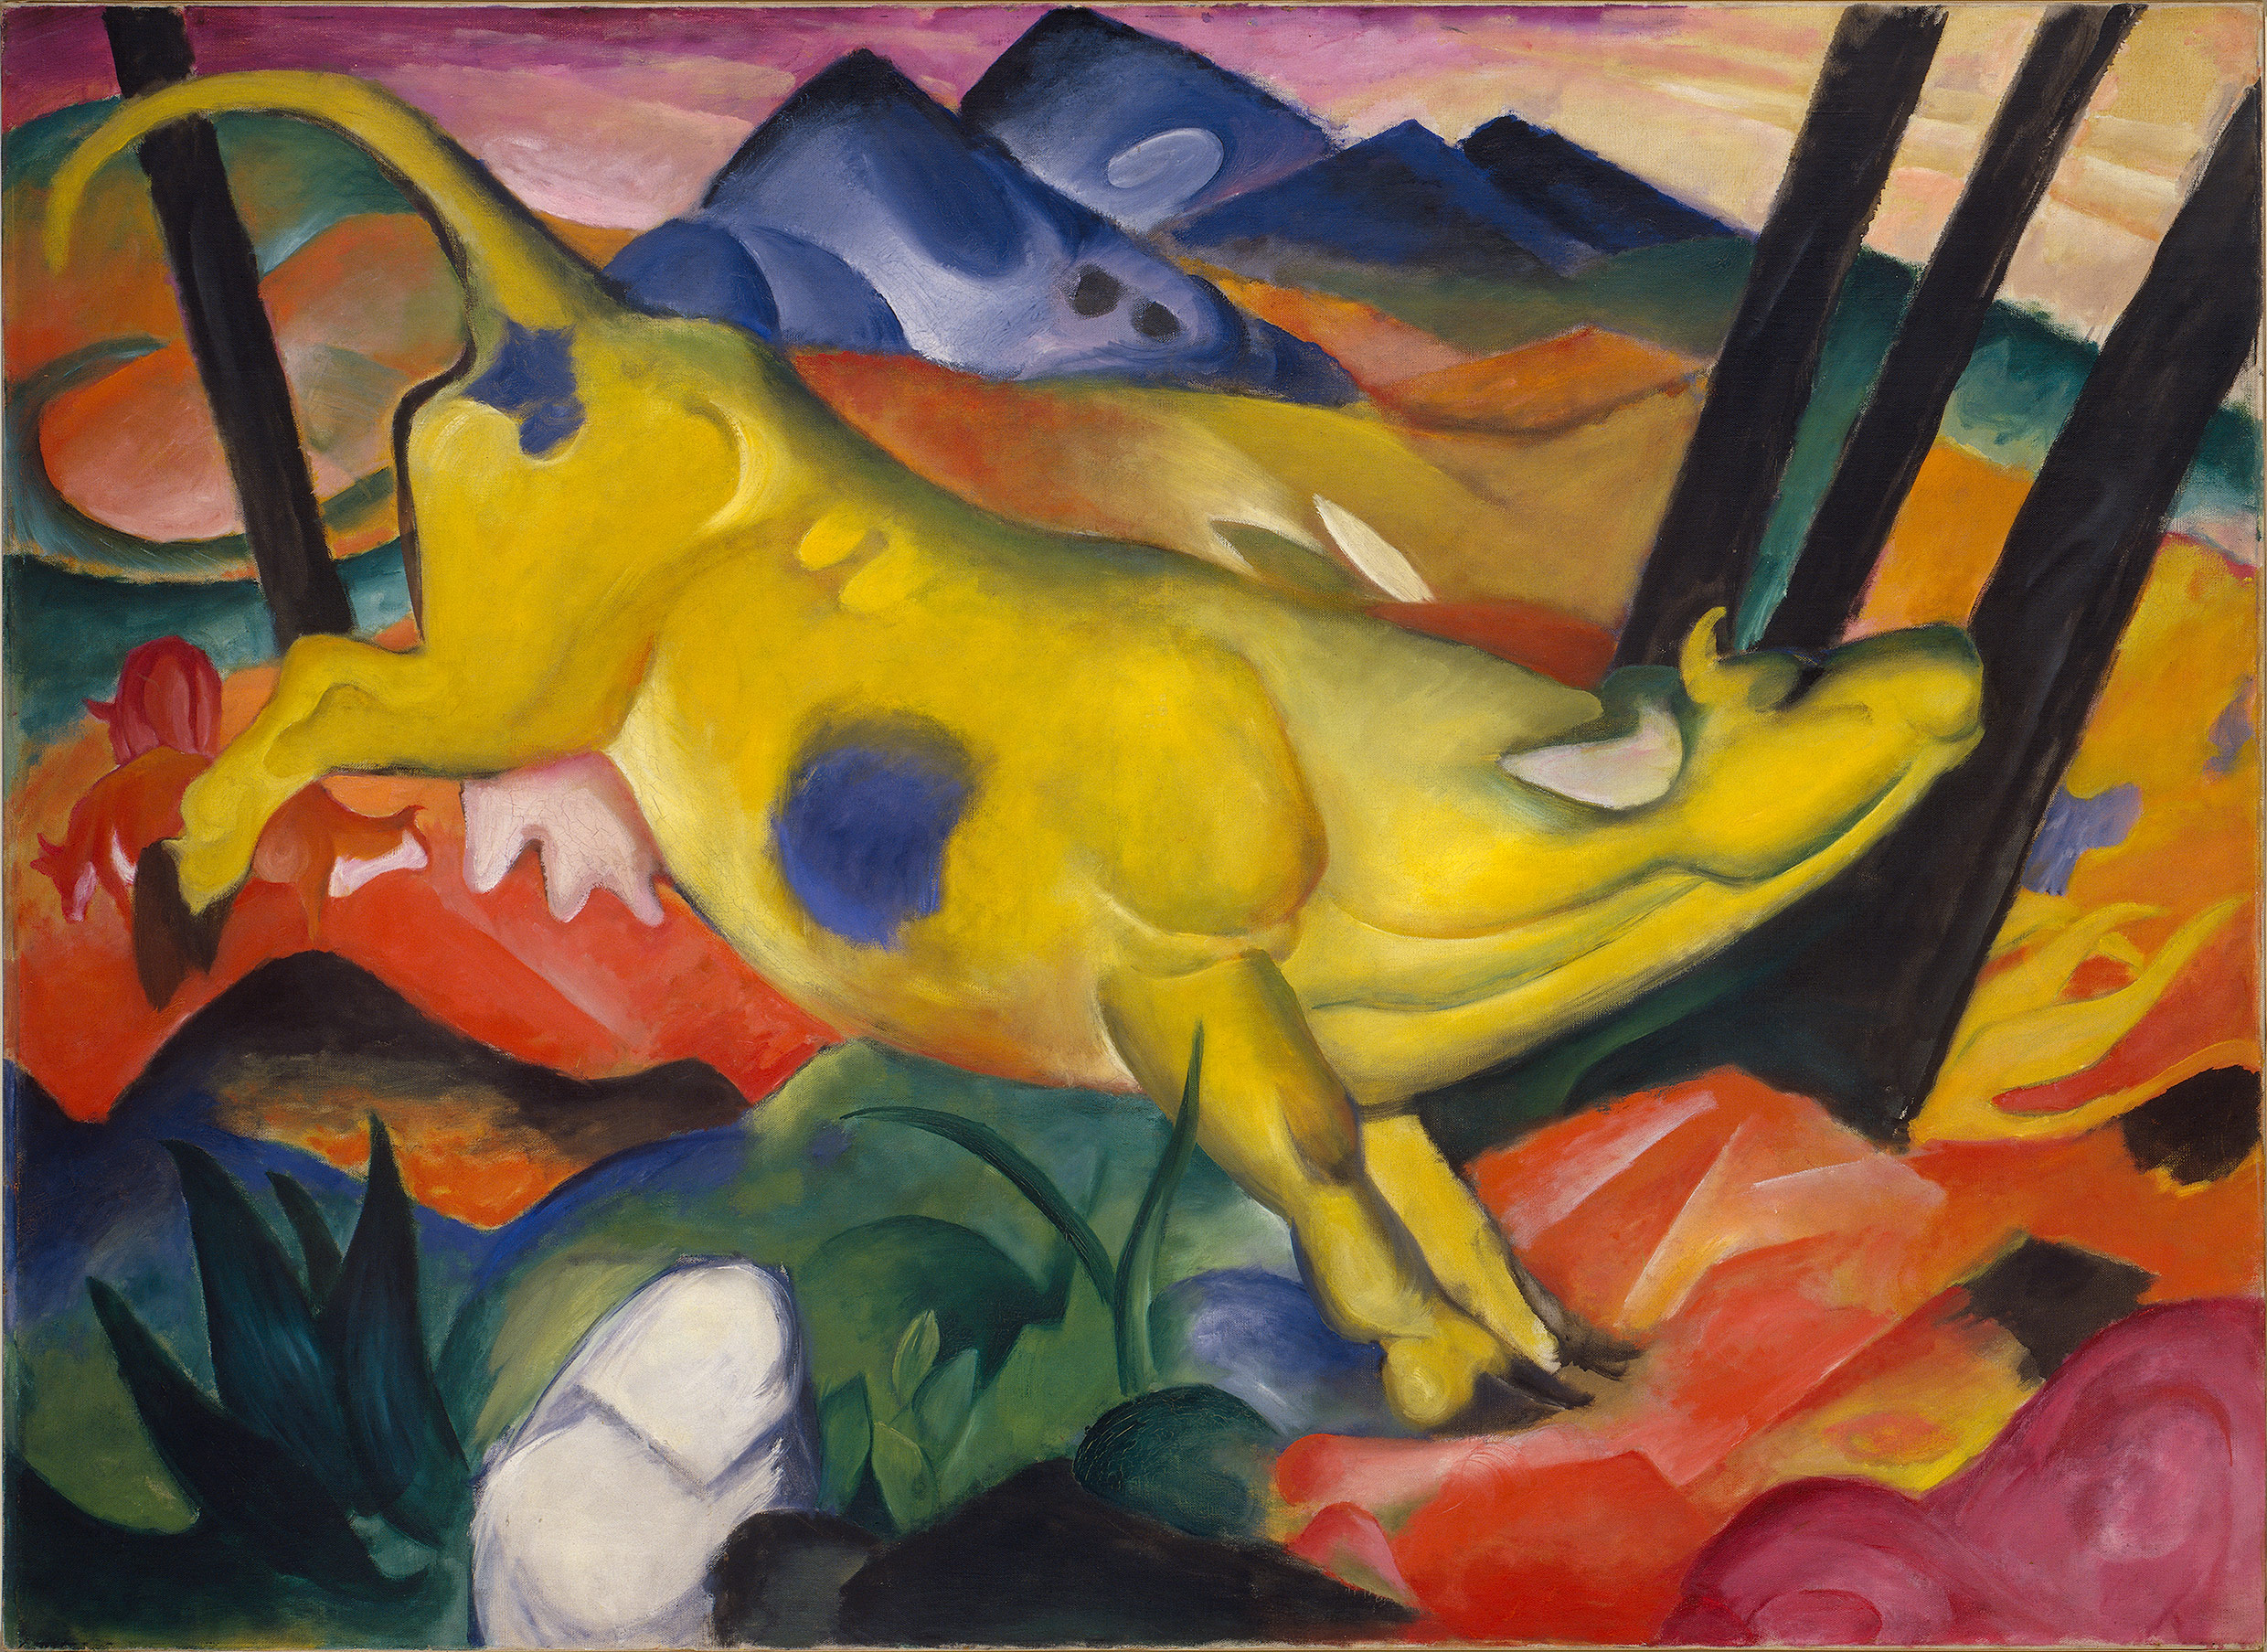 Franz Marc, Yellow Cow, 1911 | The Guggenheim Museums and Foundation